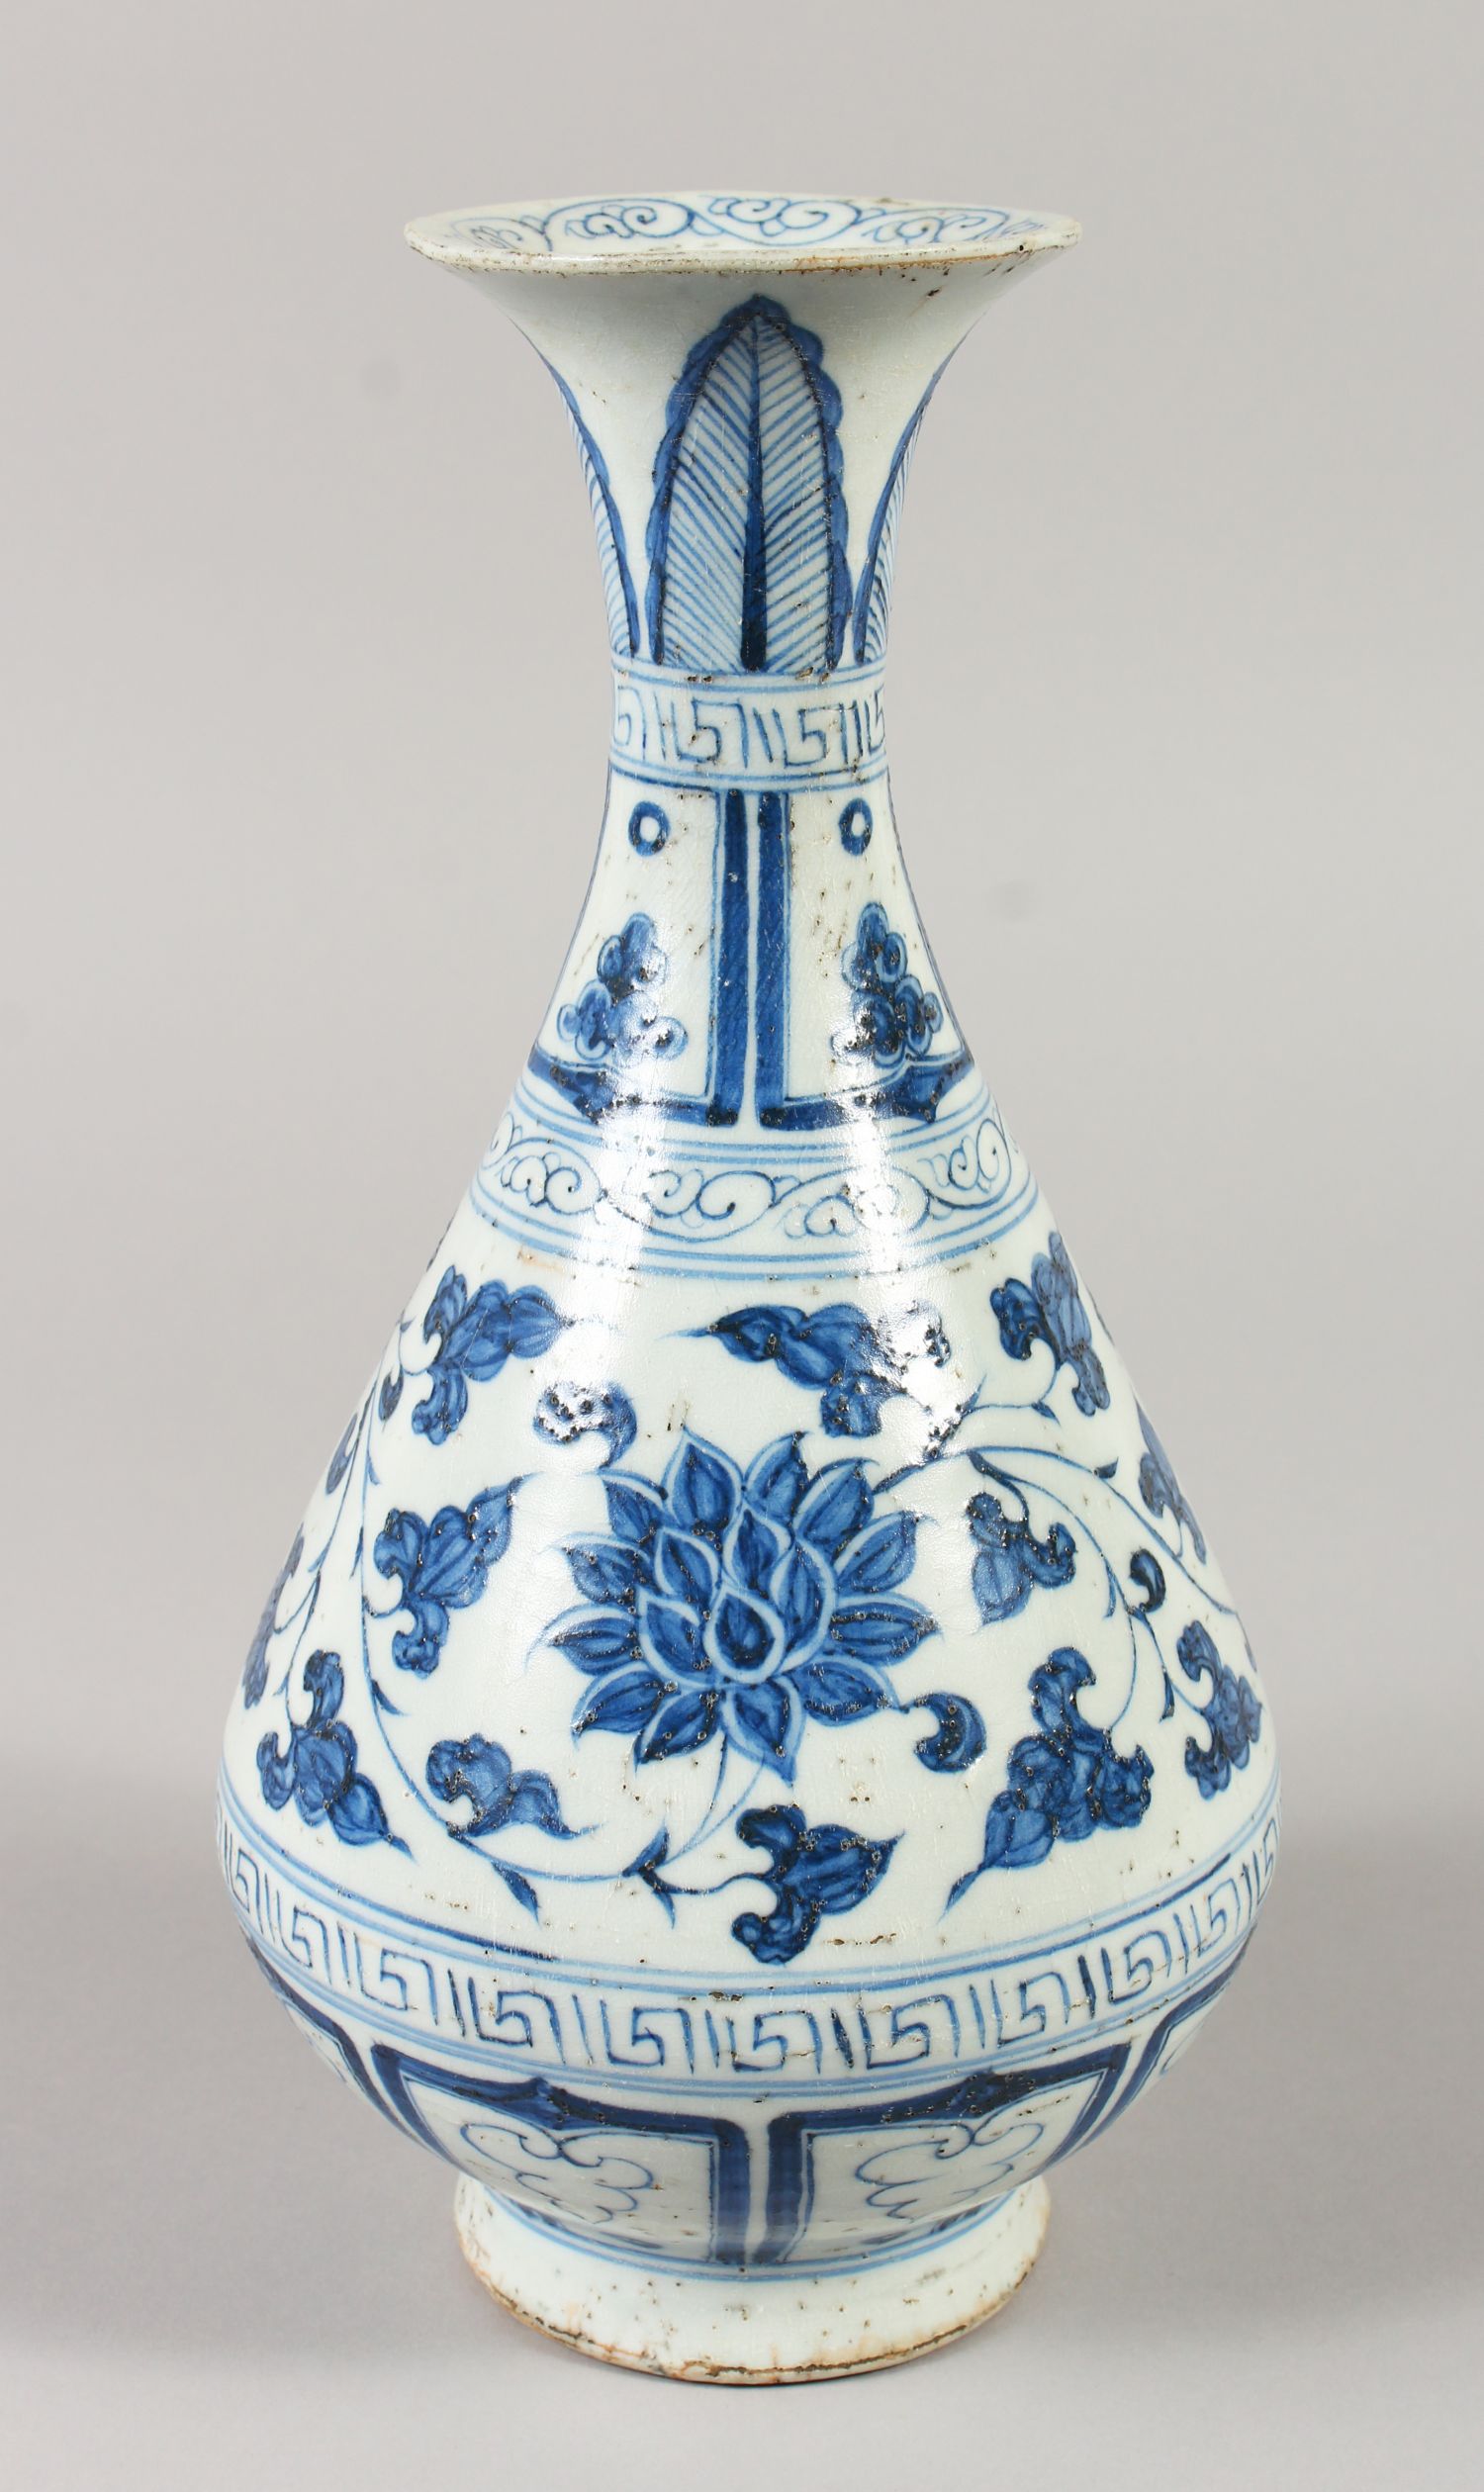 A CHINESE YUAN STYLE BLUE & WHITE YUHUCHUNPING PORCELAIN VASE, decorated with a wide band of